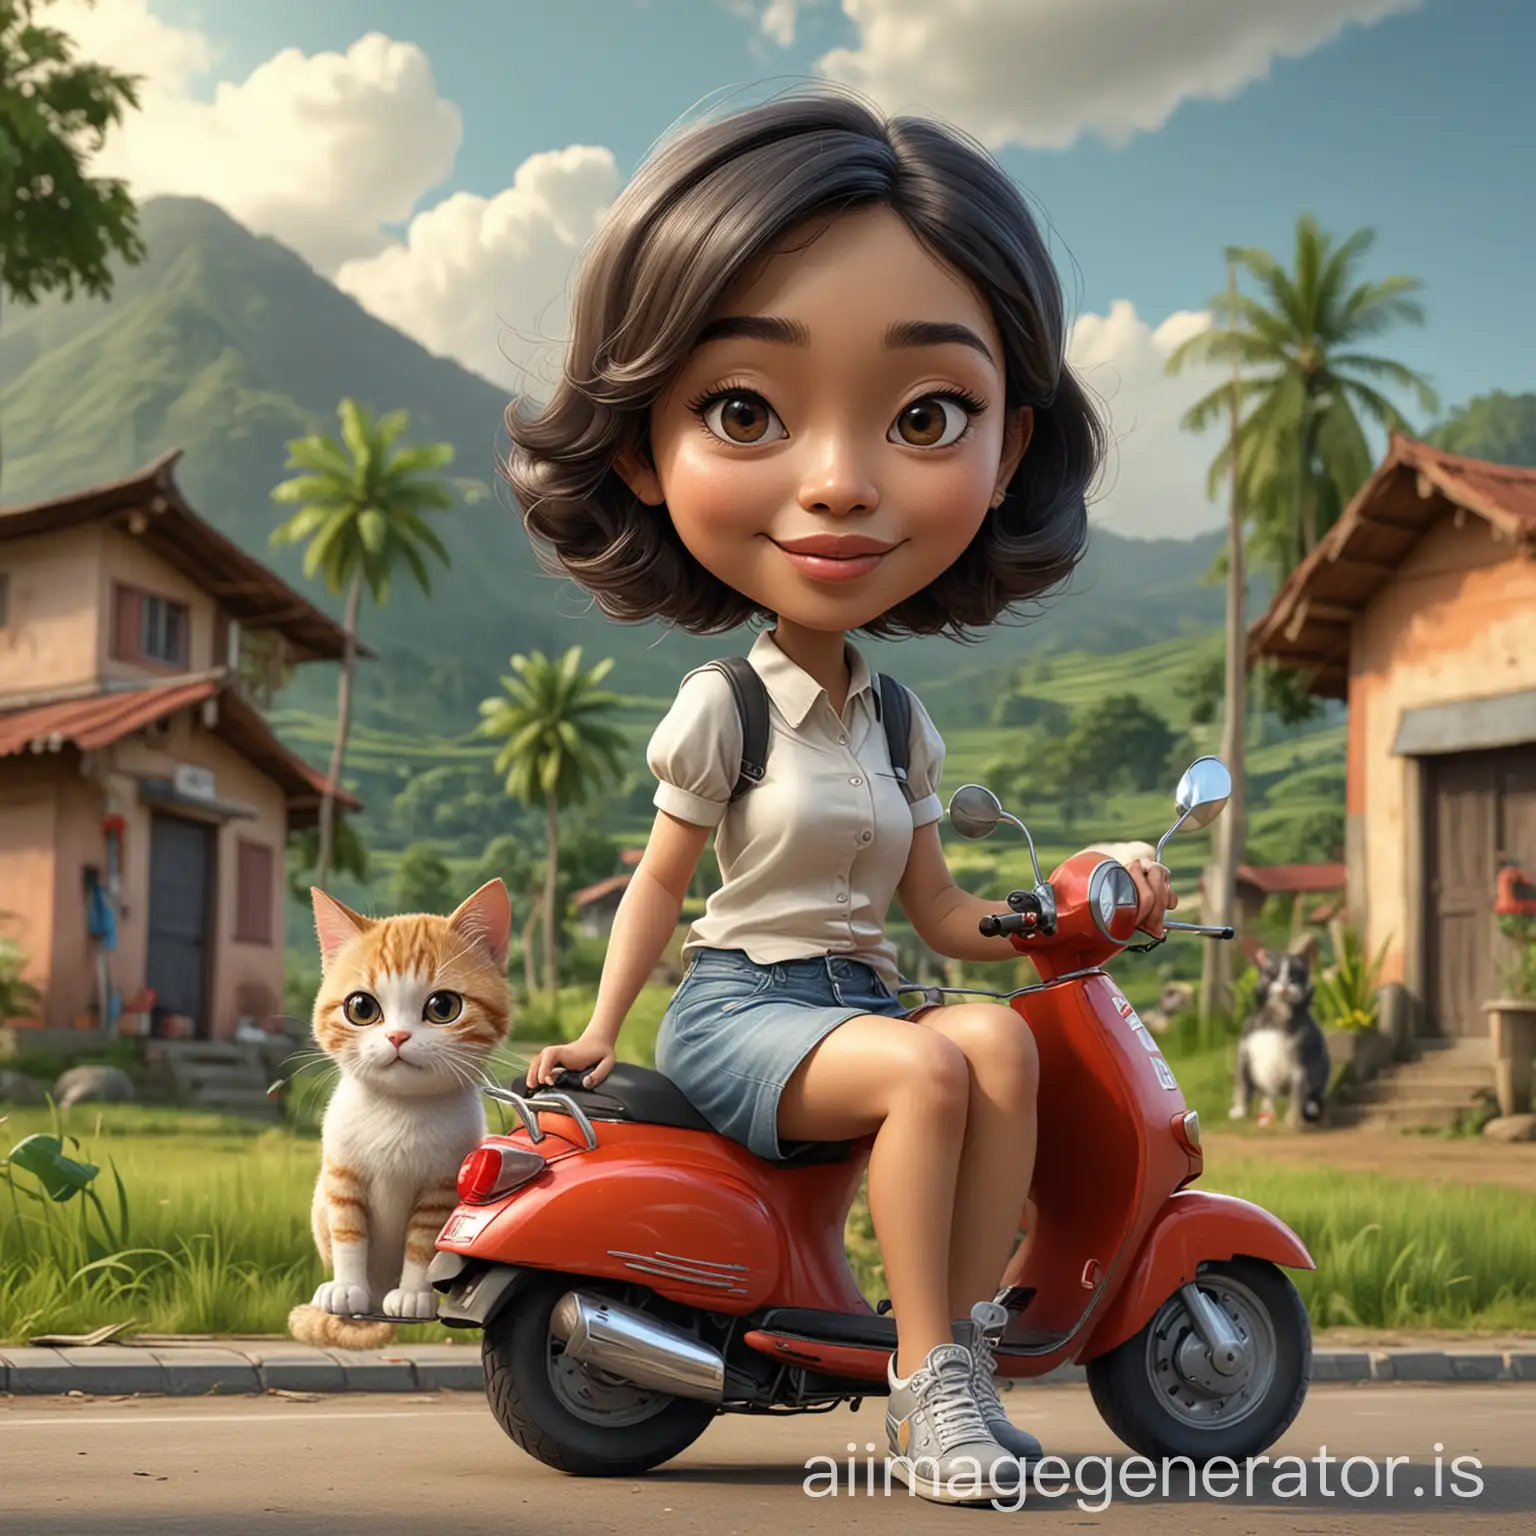 Indonesian-Woman-with-Short-Wavy-Hair-Riding-Scooter-with-Cute-Cat-in-Rural-Setting